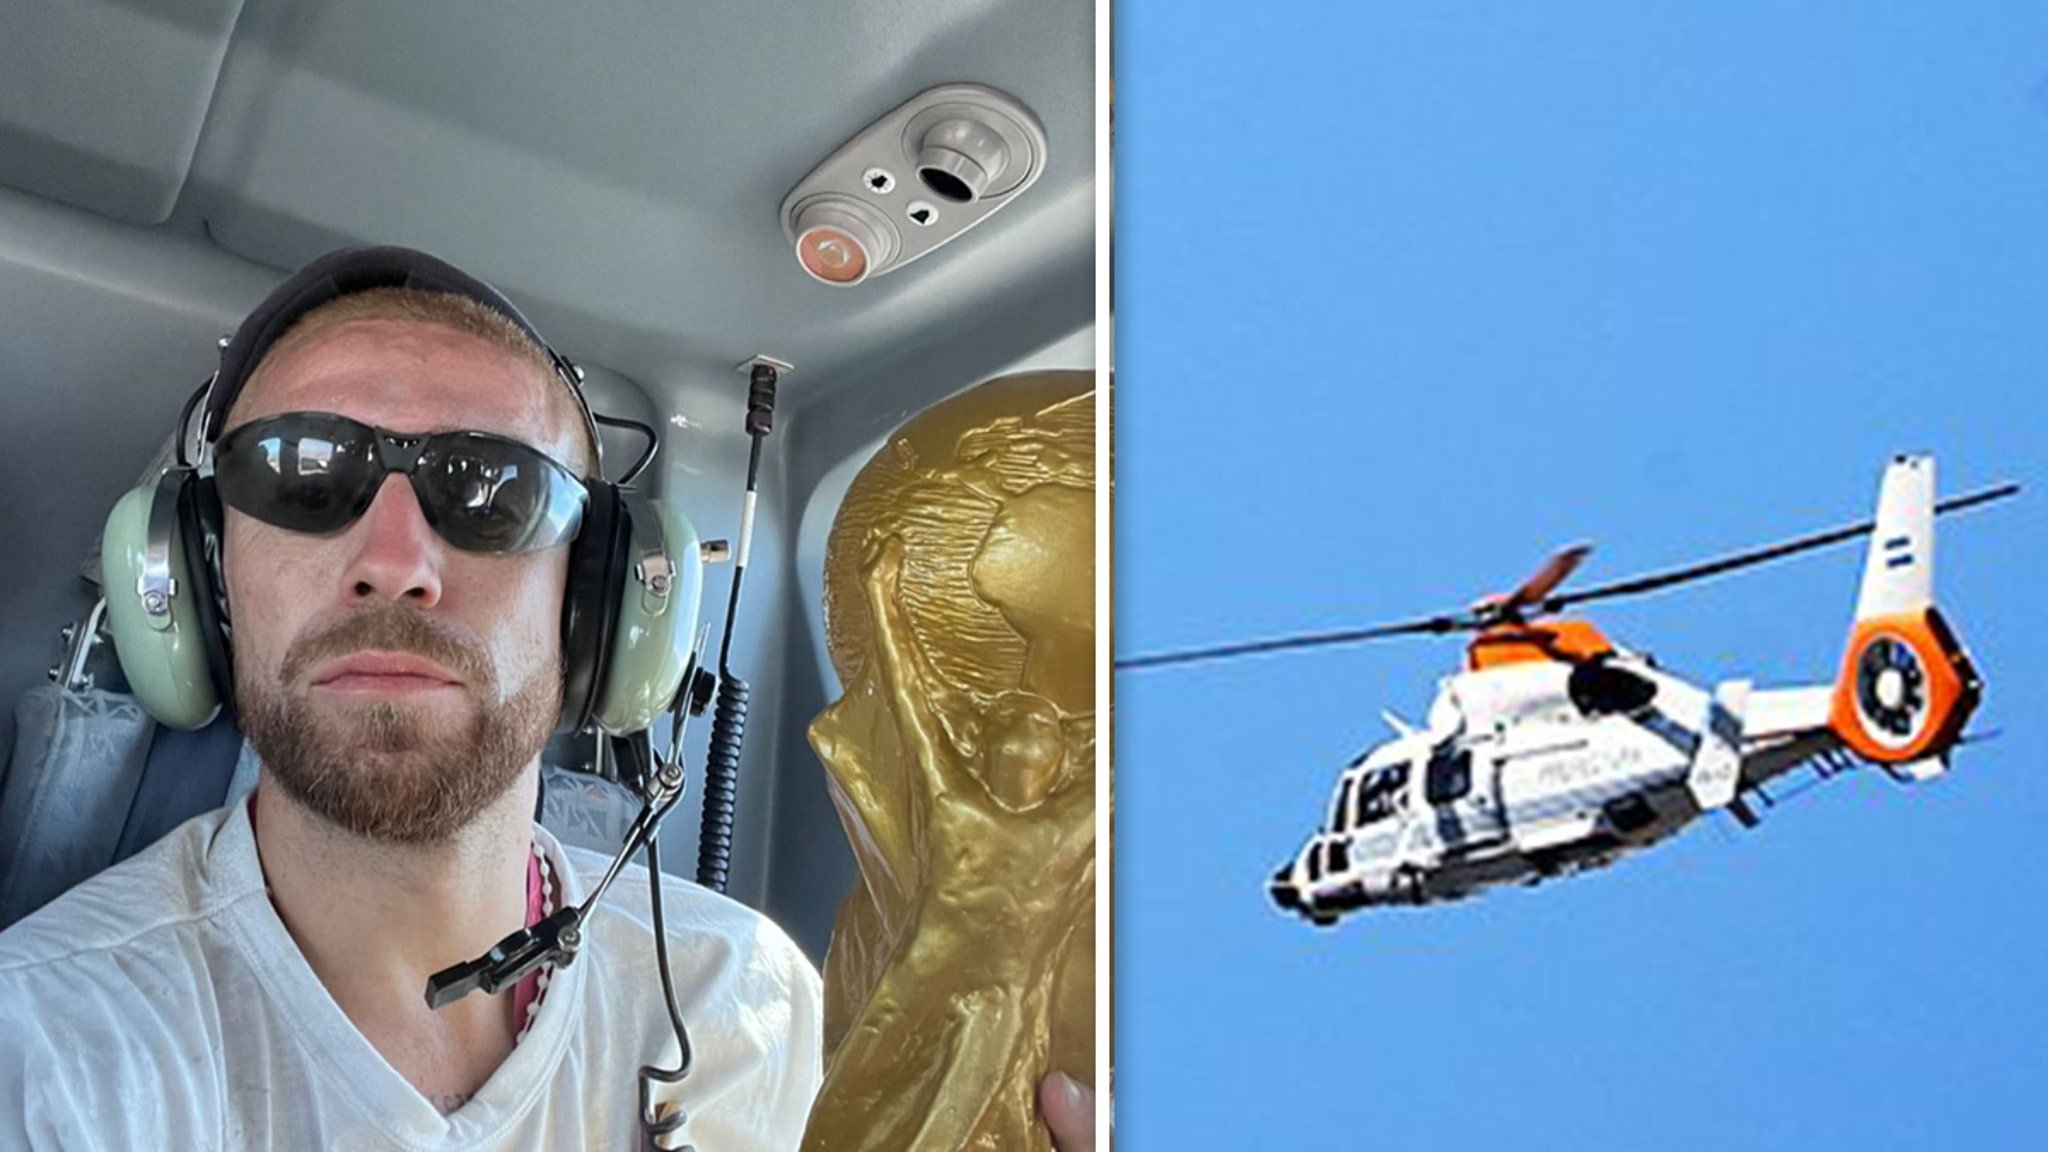 Argentina World Cup Players Evacuated On Helicopters ... After Wild Parade